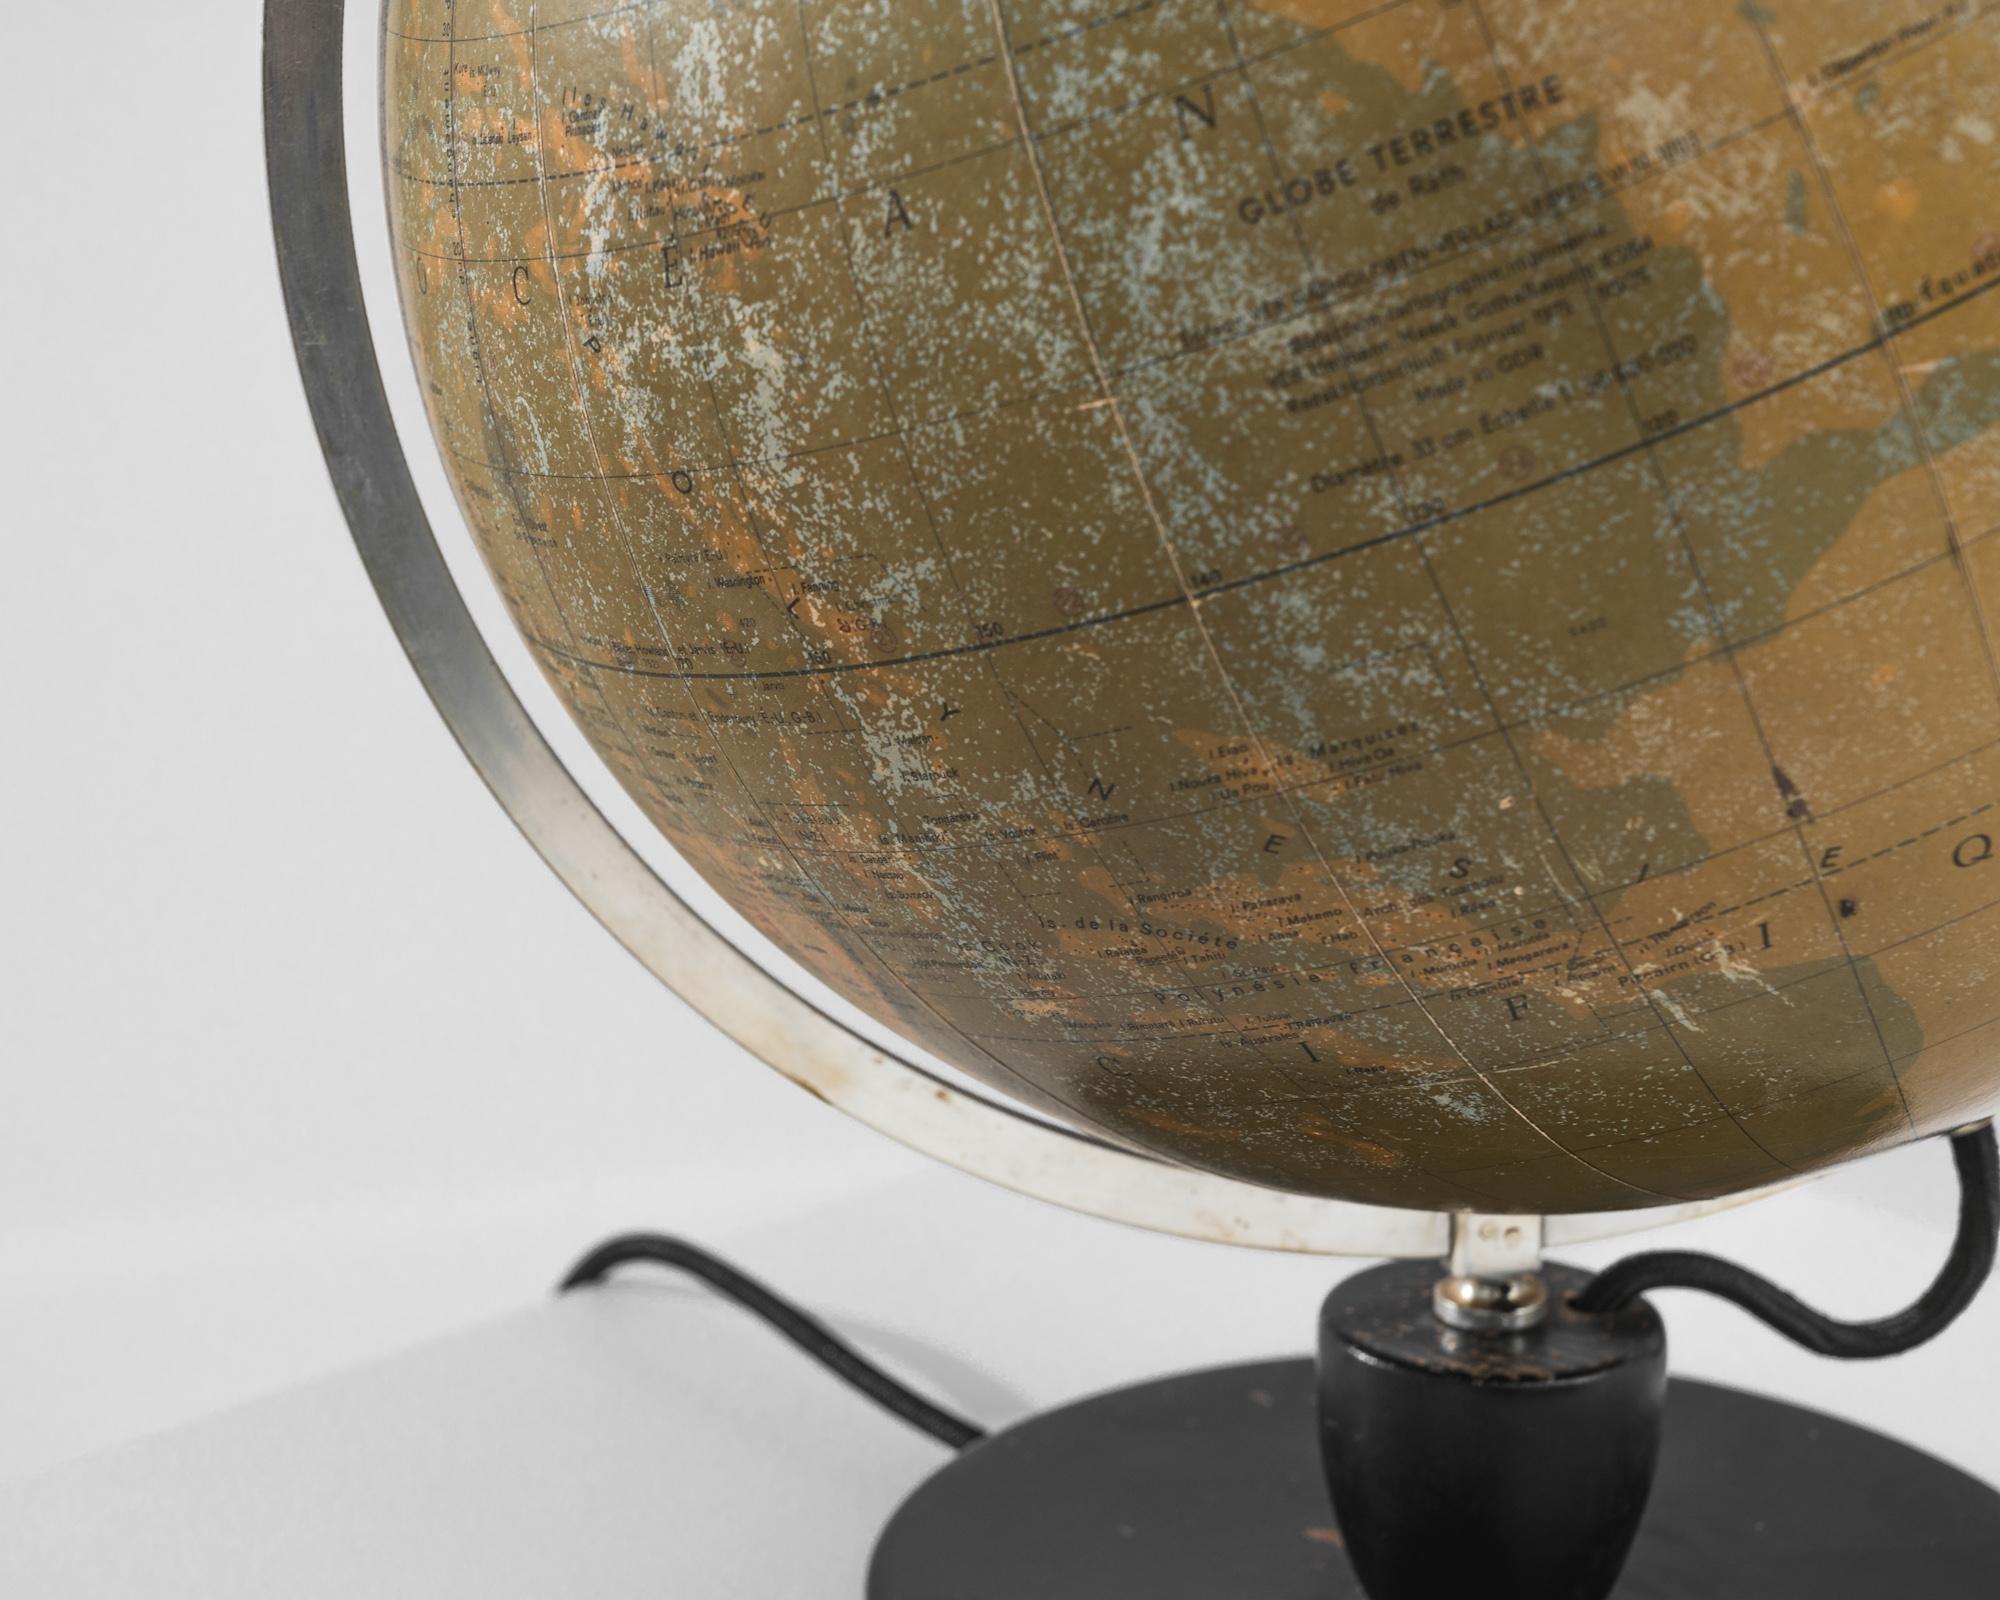 Embark on a journey through time and geography with this 1950s German Wooden and Glass Globe. Crafted to perfection, the globe encapsulates the world in a stunning representation of continents, countries, and oceans. The wooden base provides a